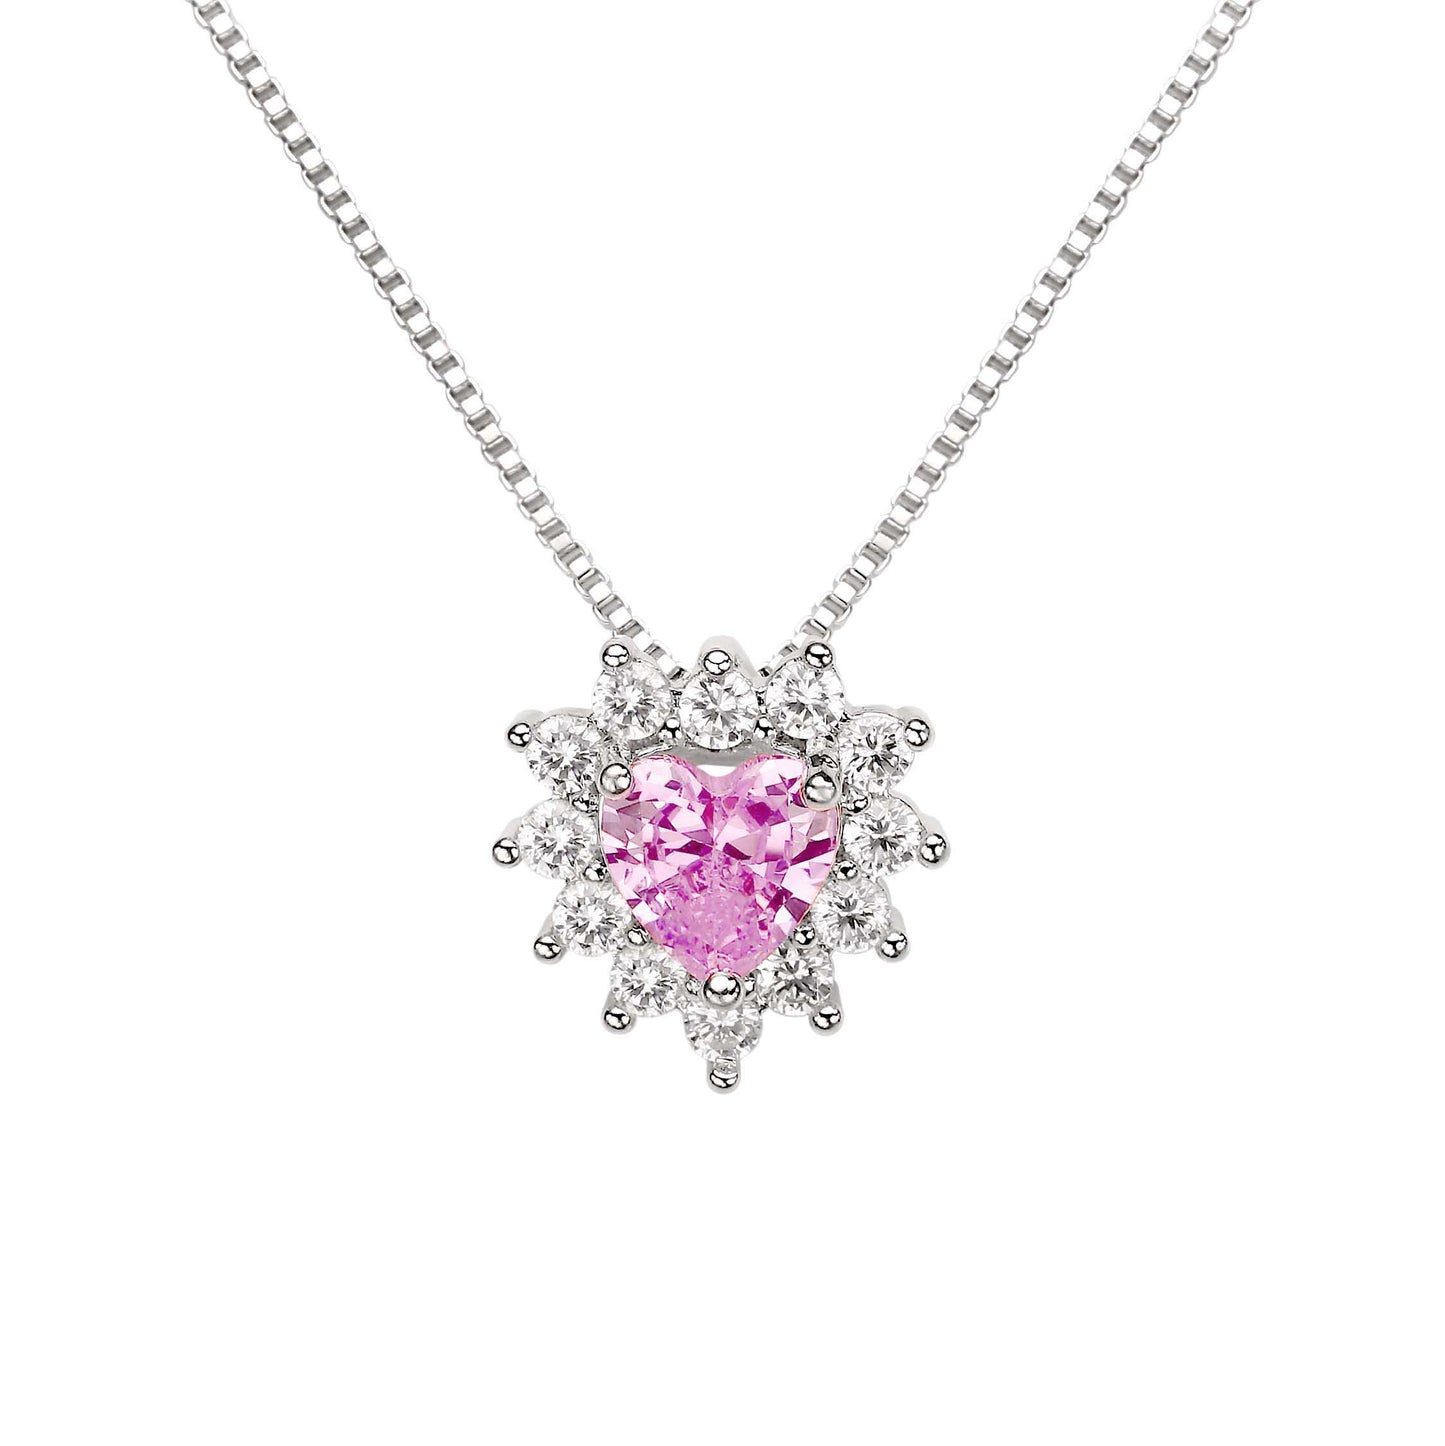 PINK HEART SET | Double White Rhodium Plated